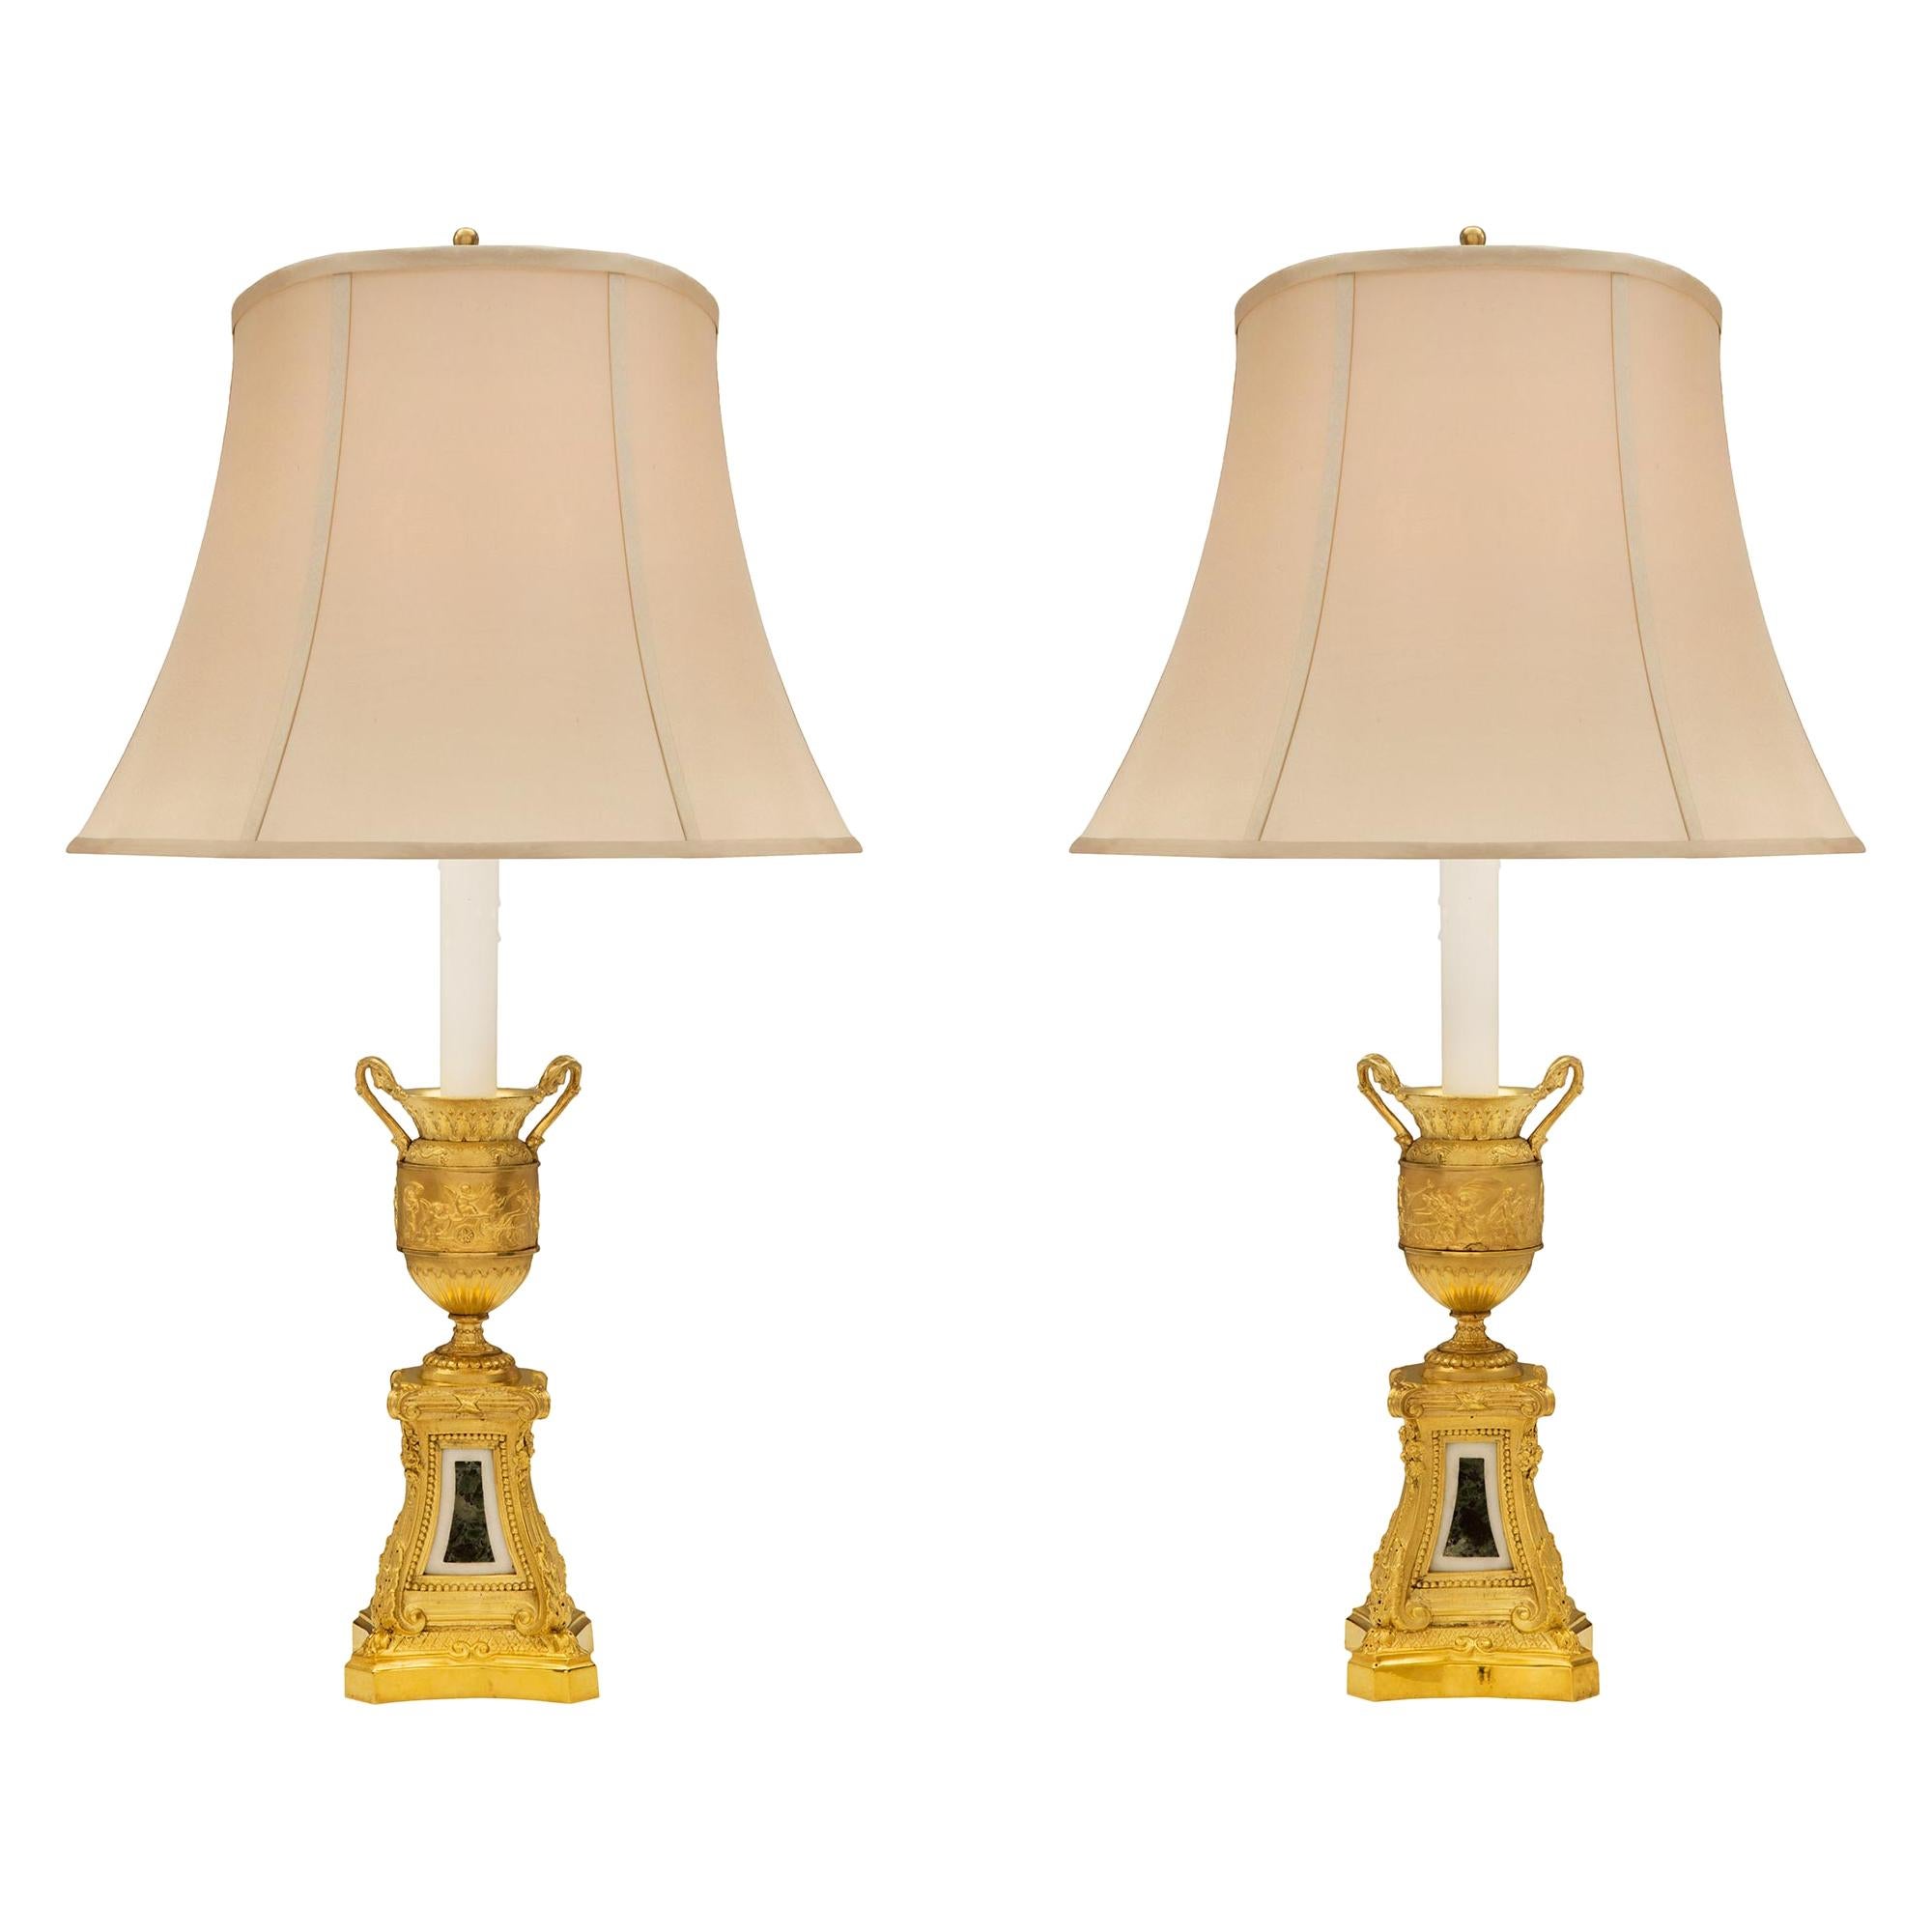 Pair of French 19th Century Louis XVI Style Ormolu and Marble Lamps